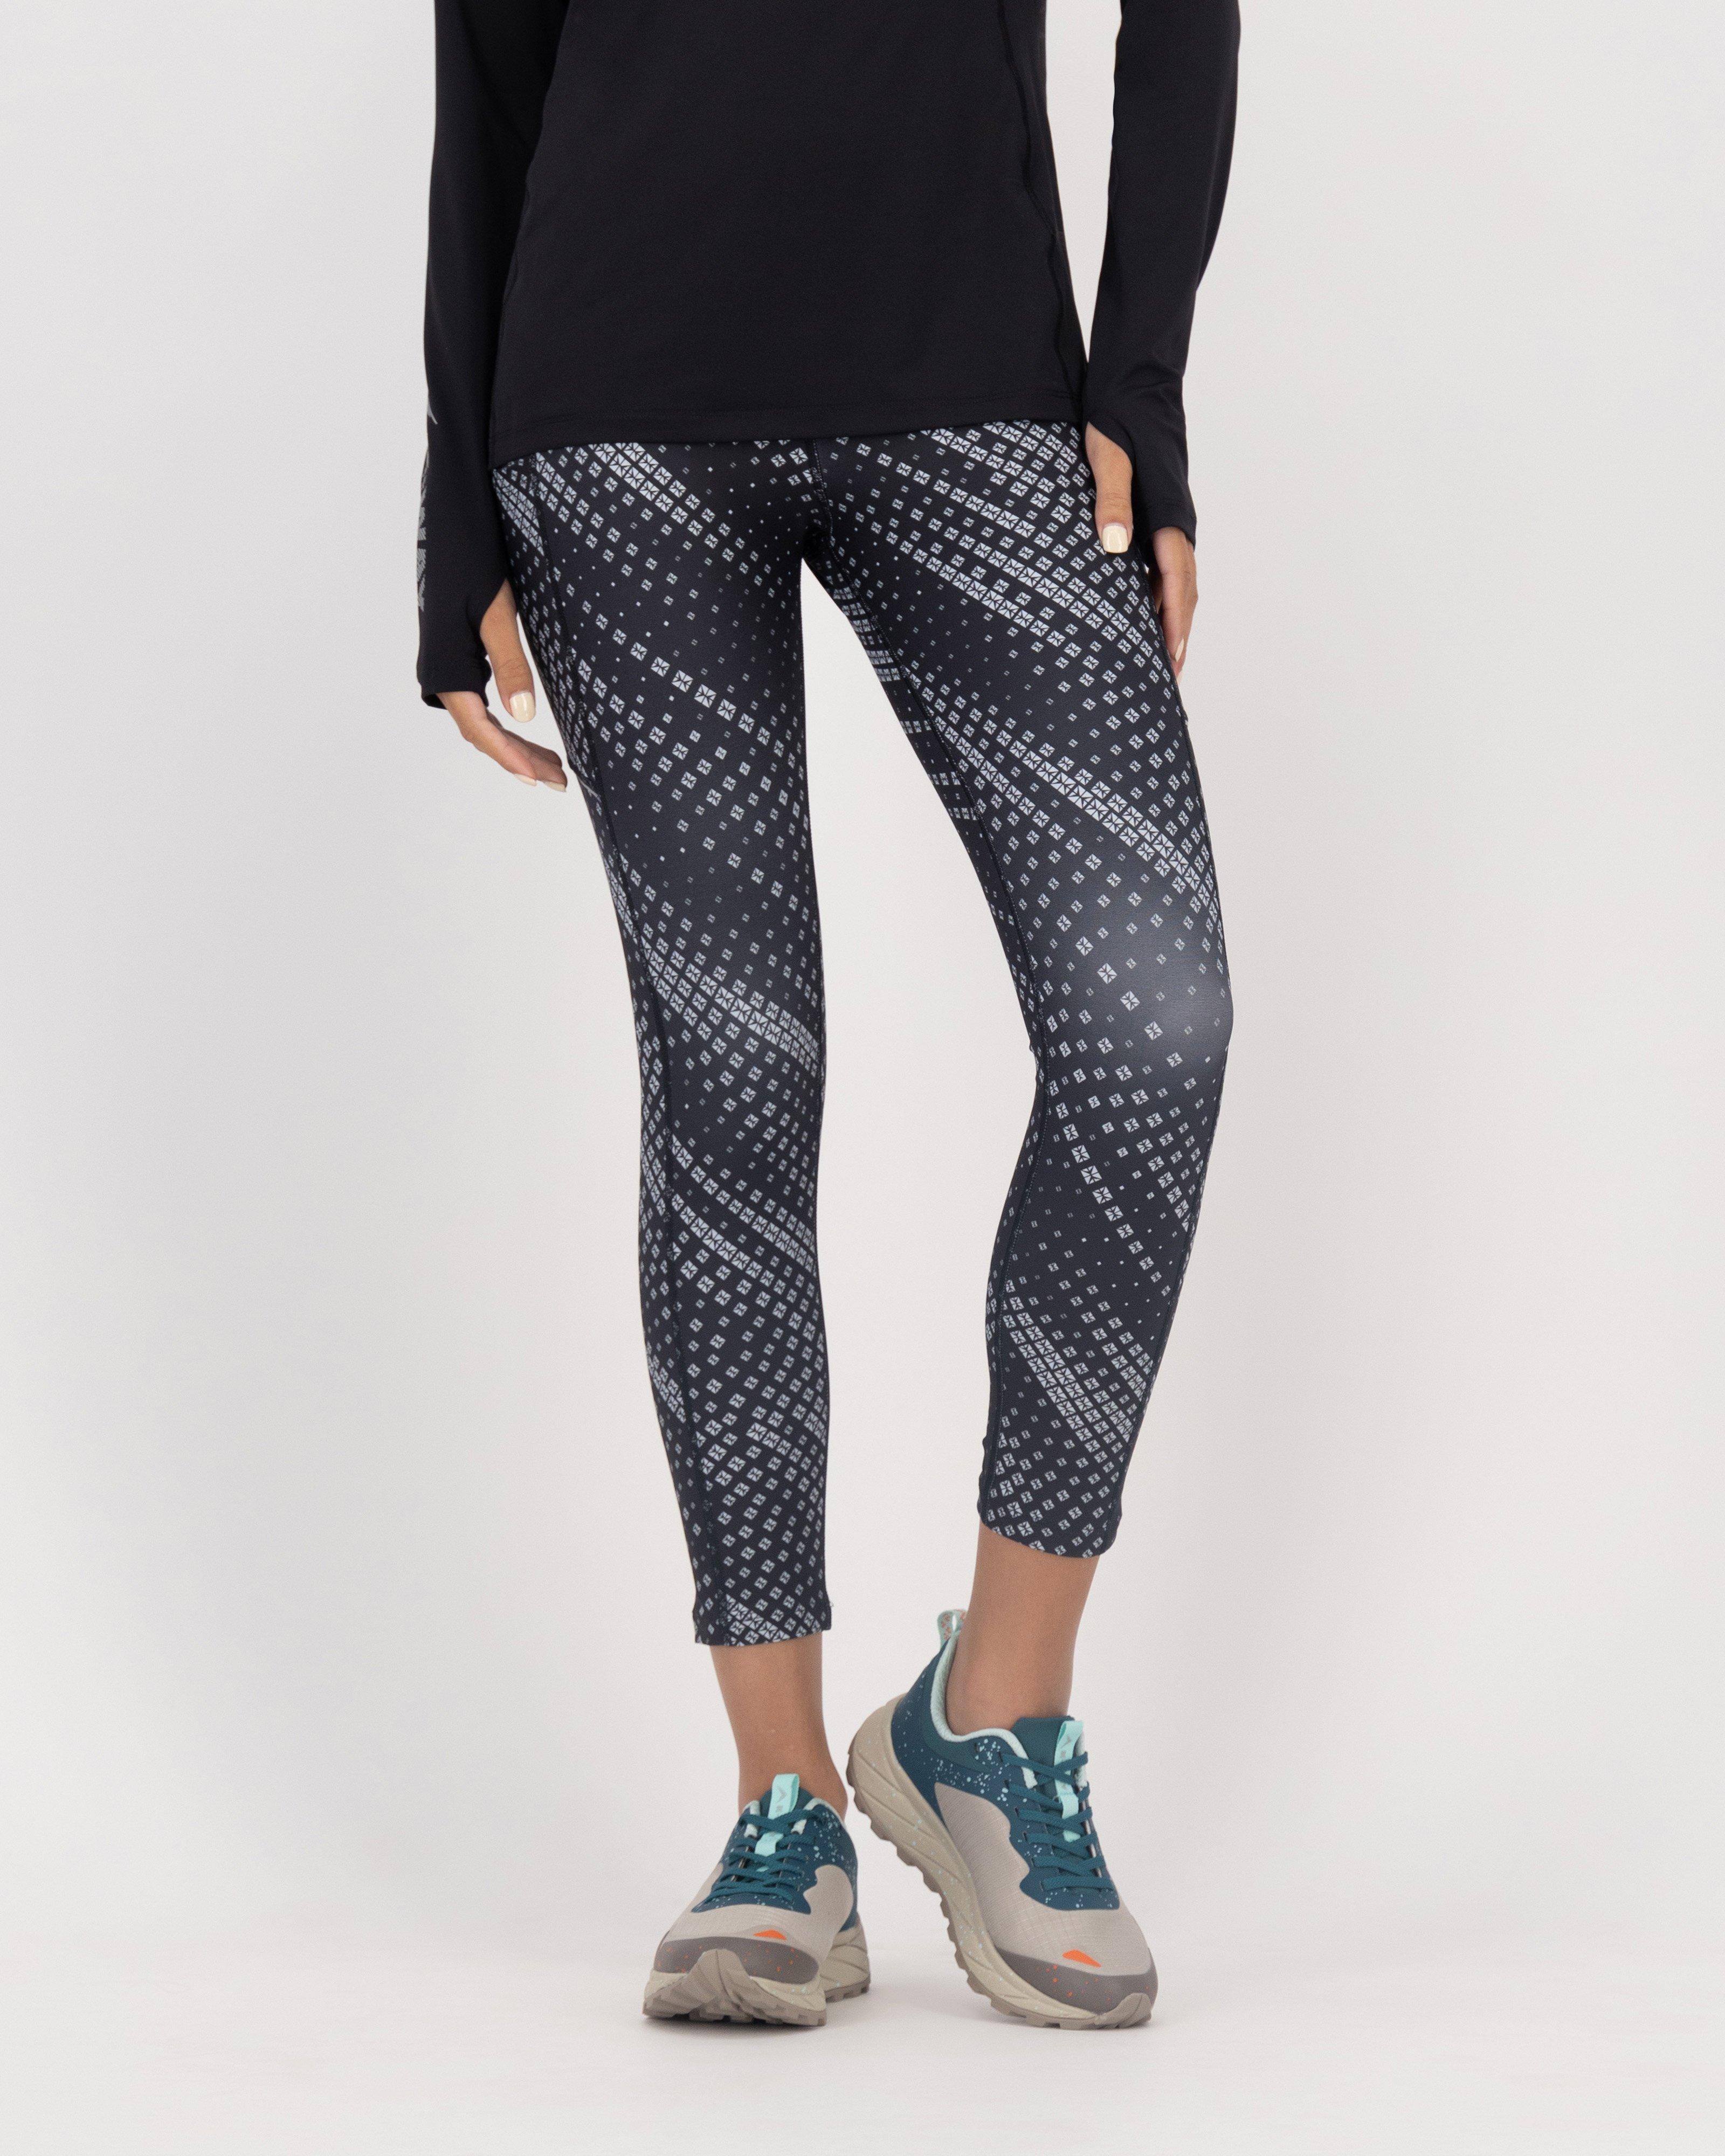 New UNDER ARMOUR Women's Leggings SMALL Take-A-Chance Polka Dot